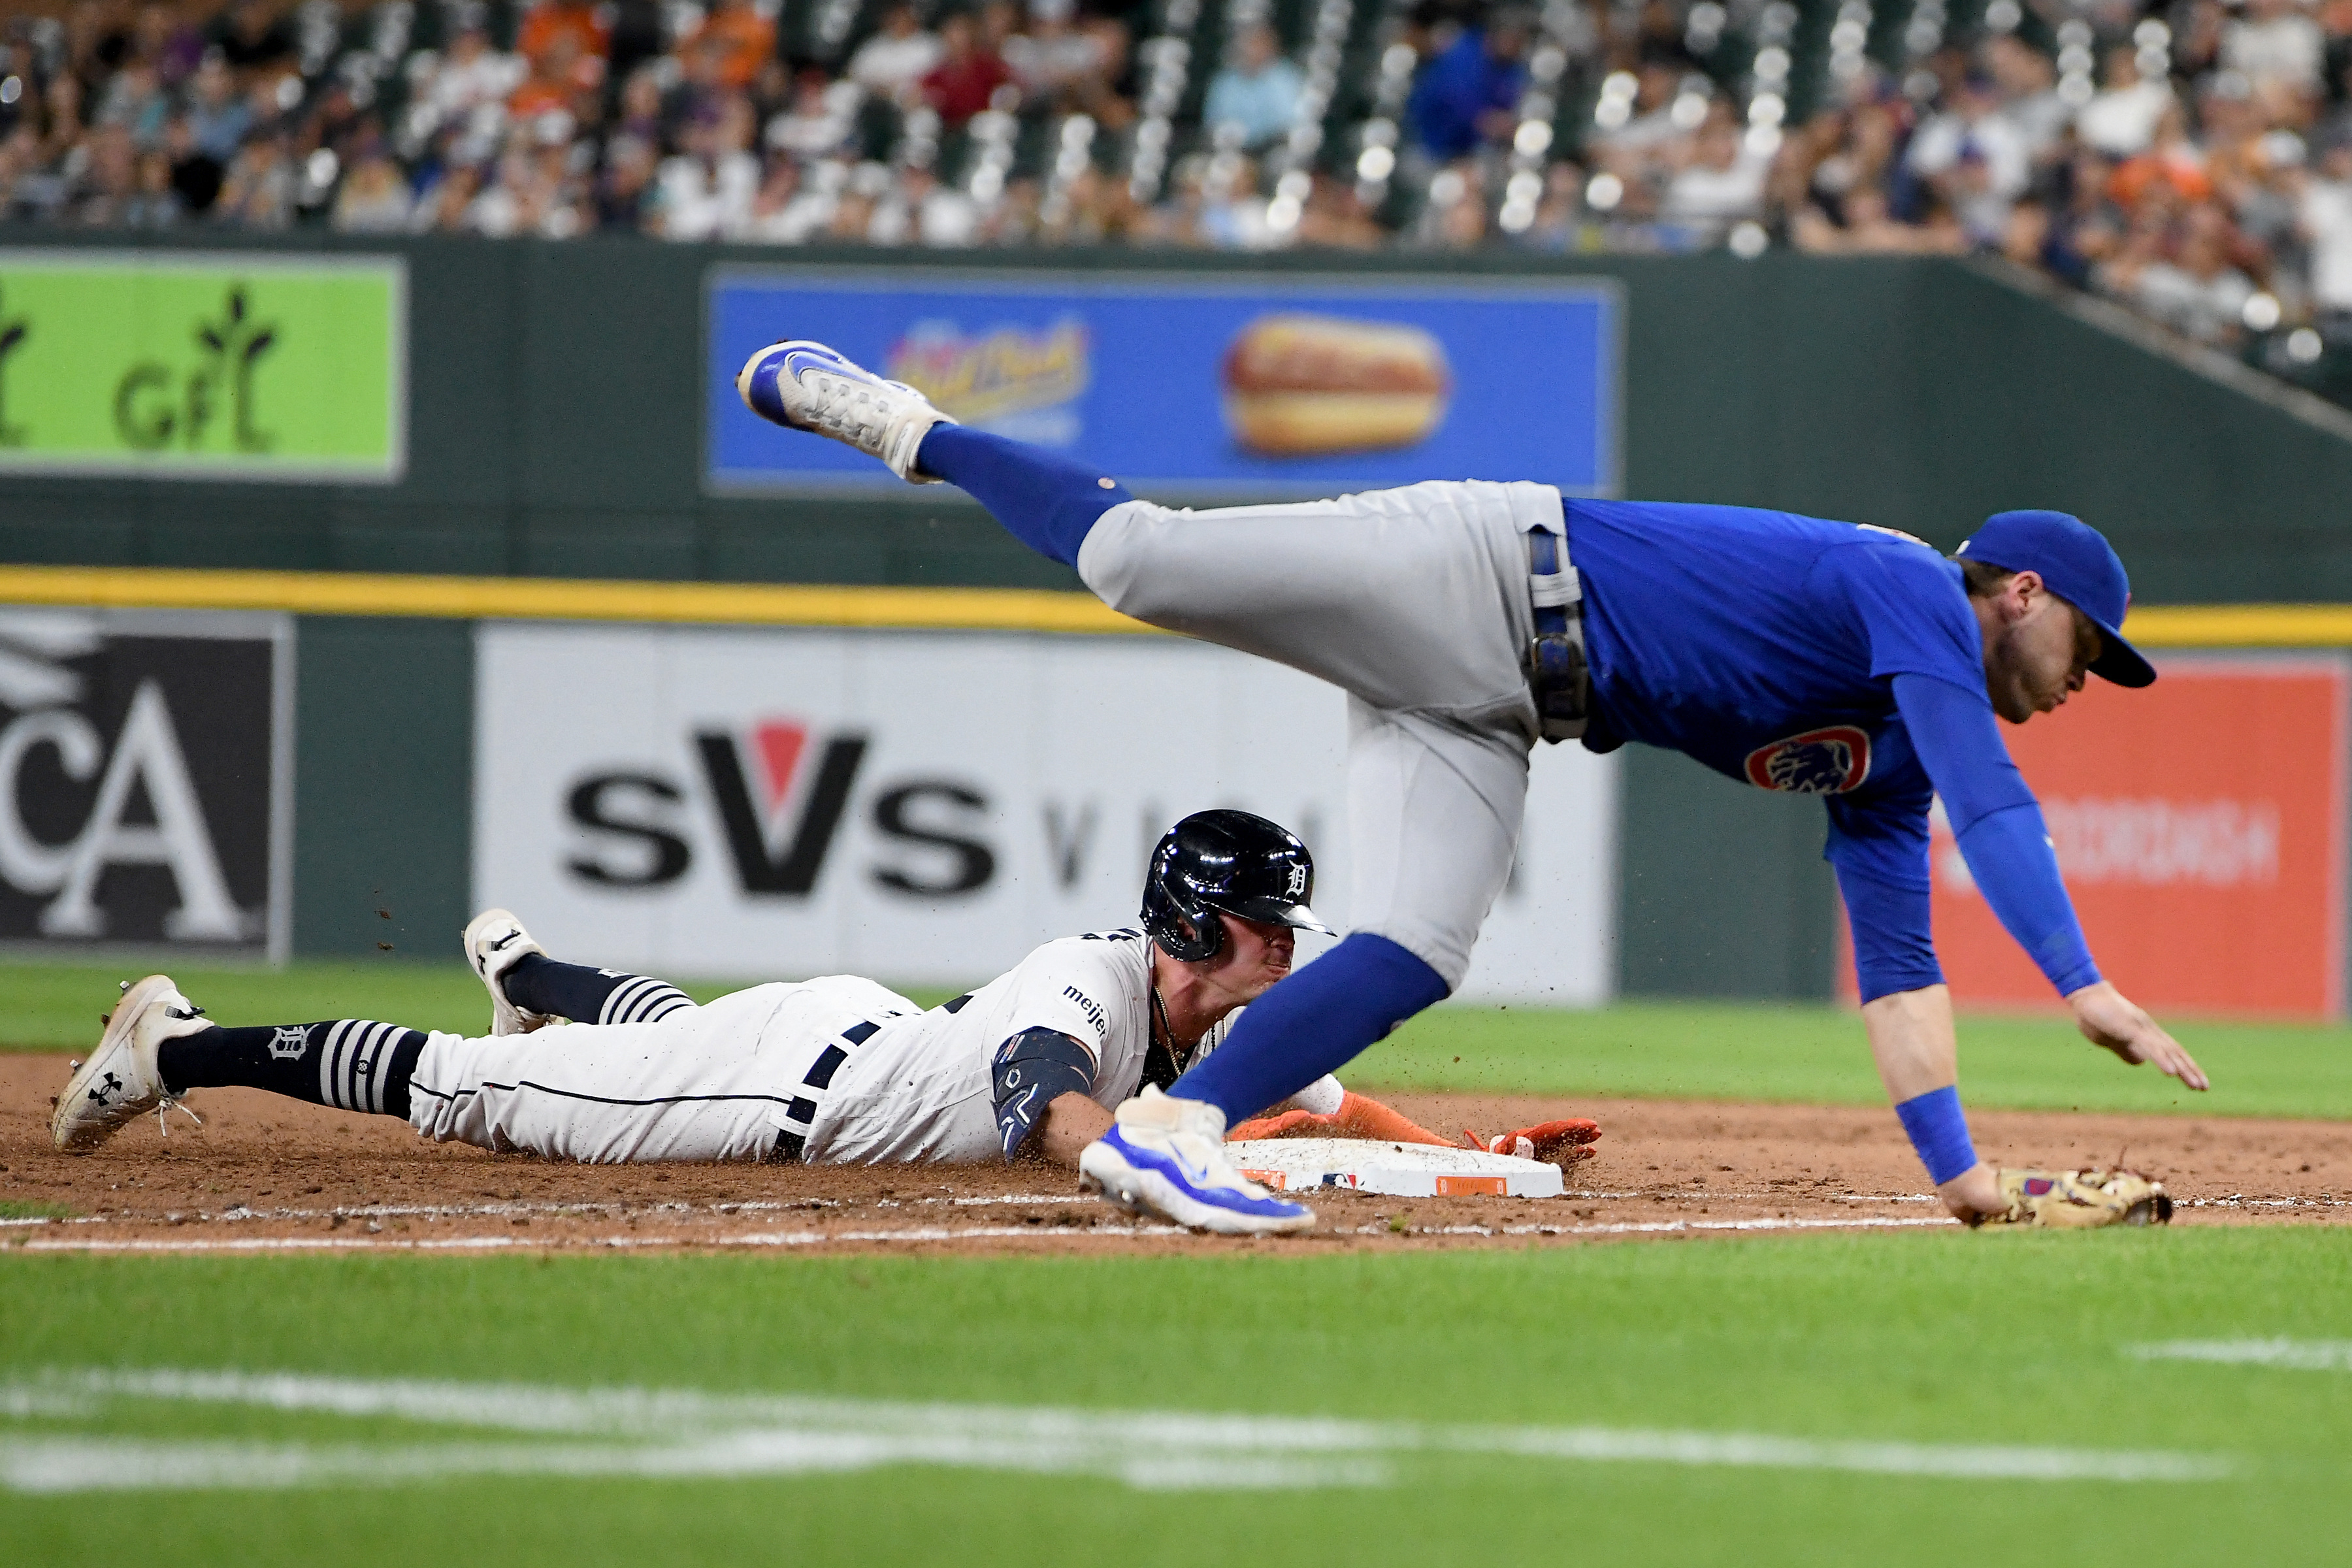 Insurance runs pay off for Cubs in win over Tigers